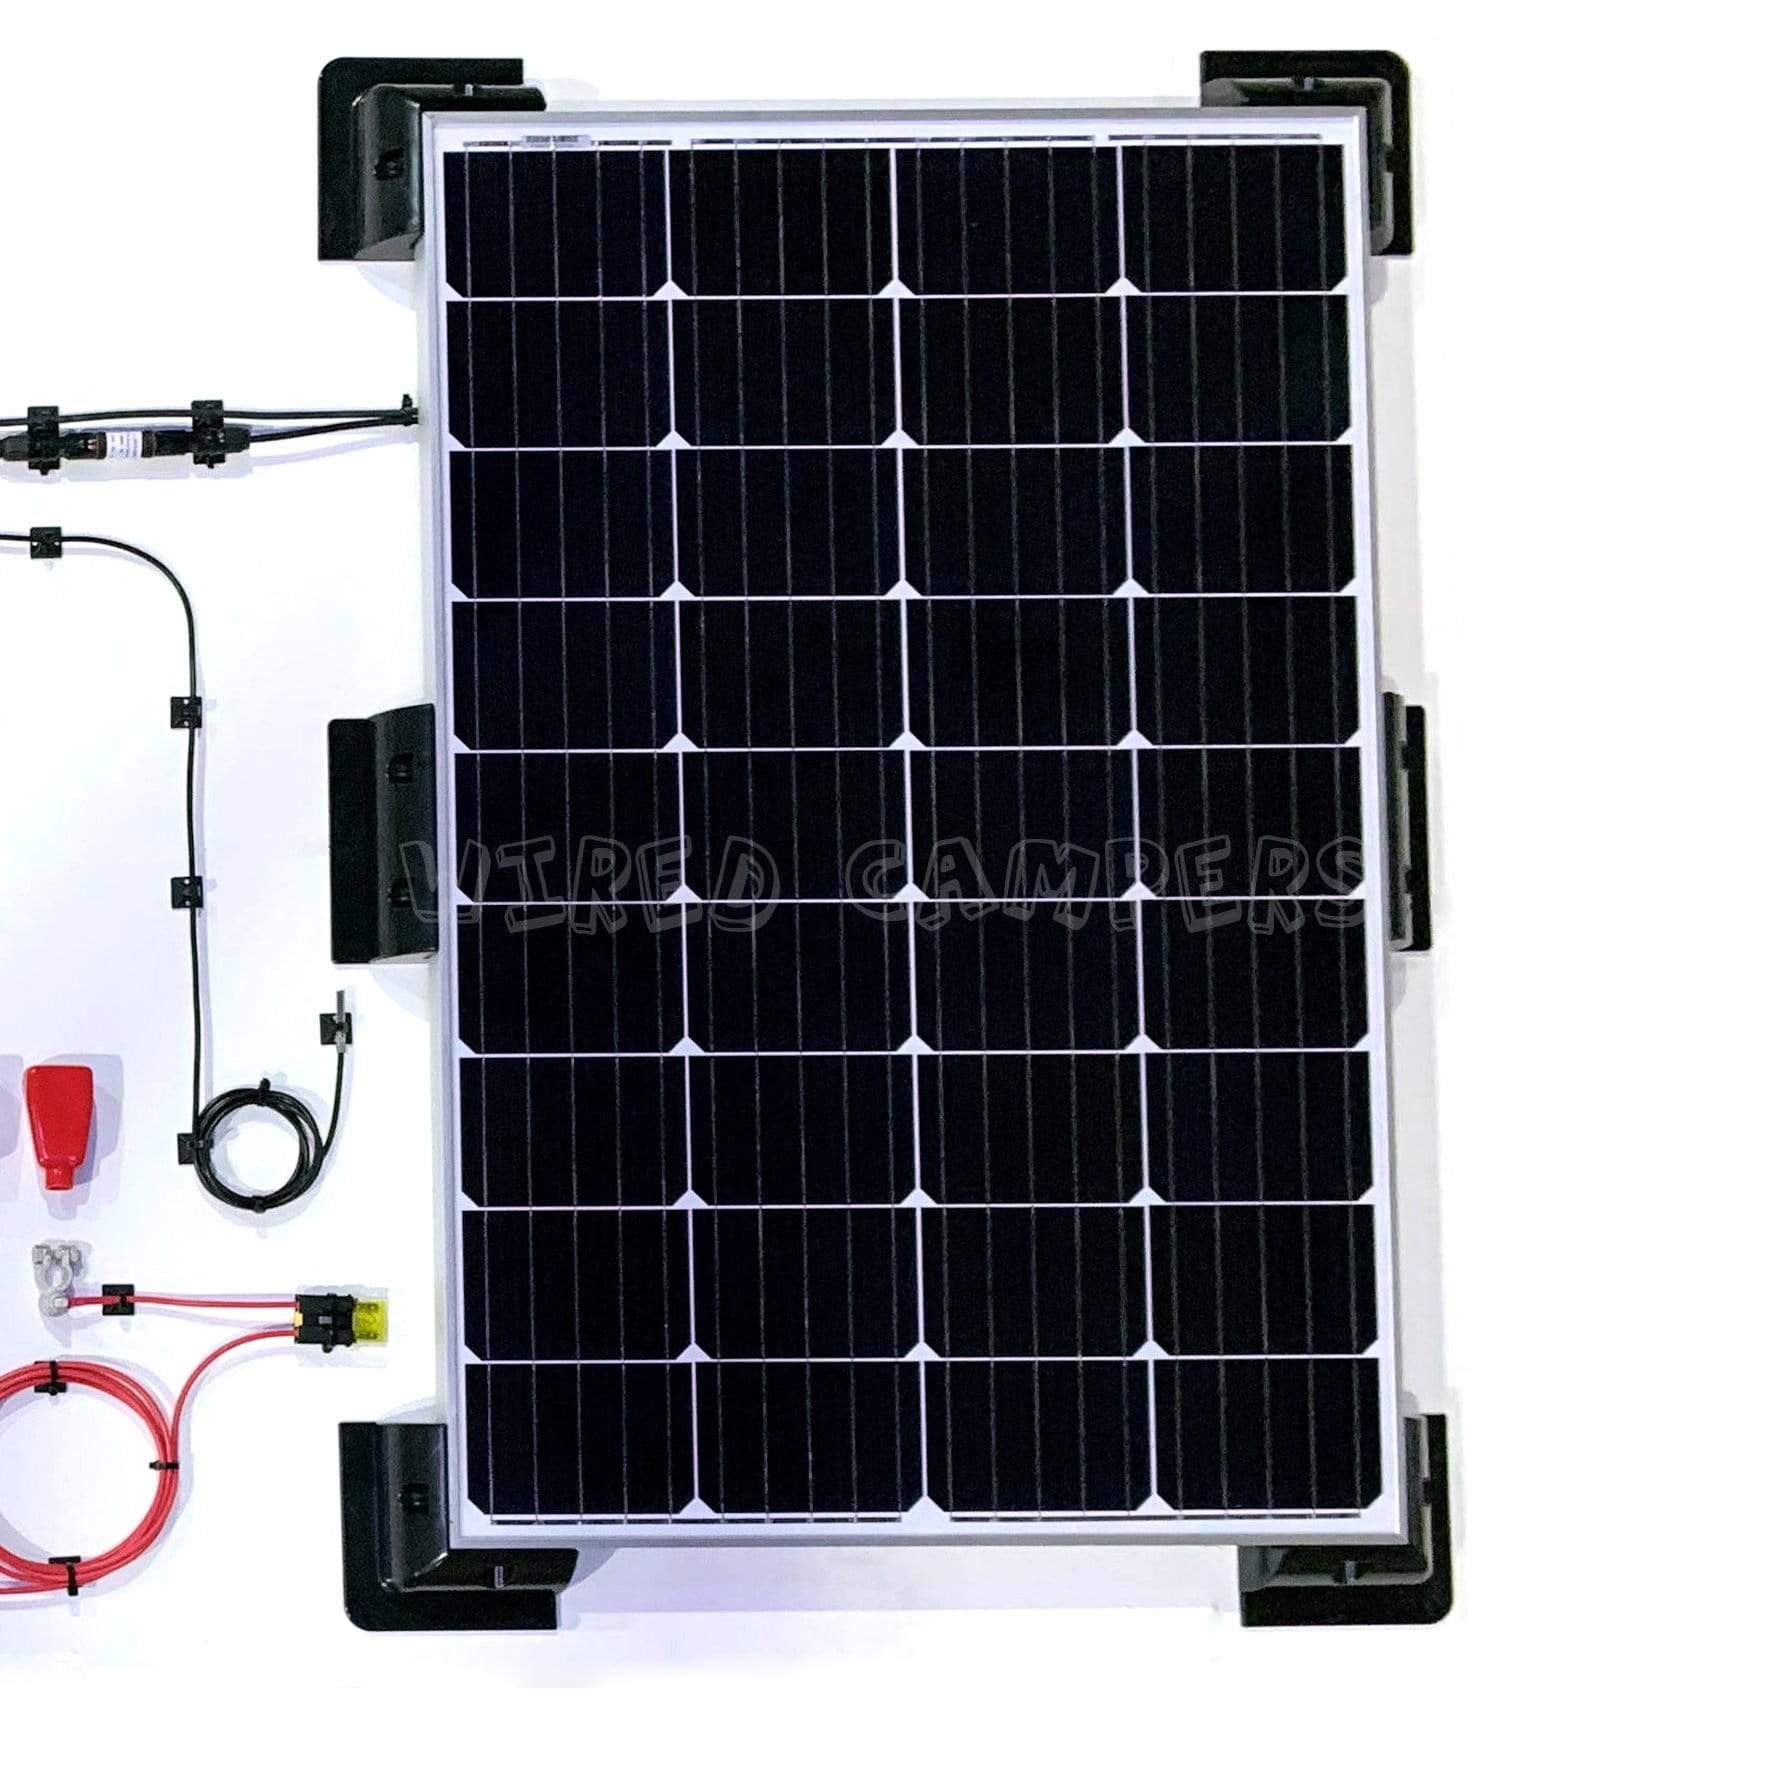 Wired Campers 40A EPEVER MPPT & Victron Energy 350W BlueSolar Mono Solar Panel Camper Van Kit